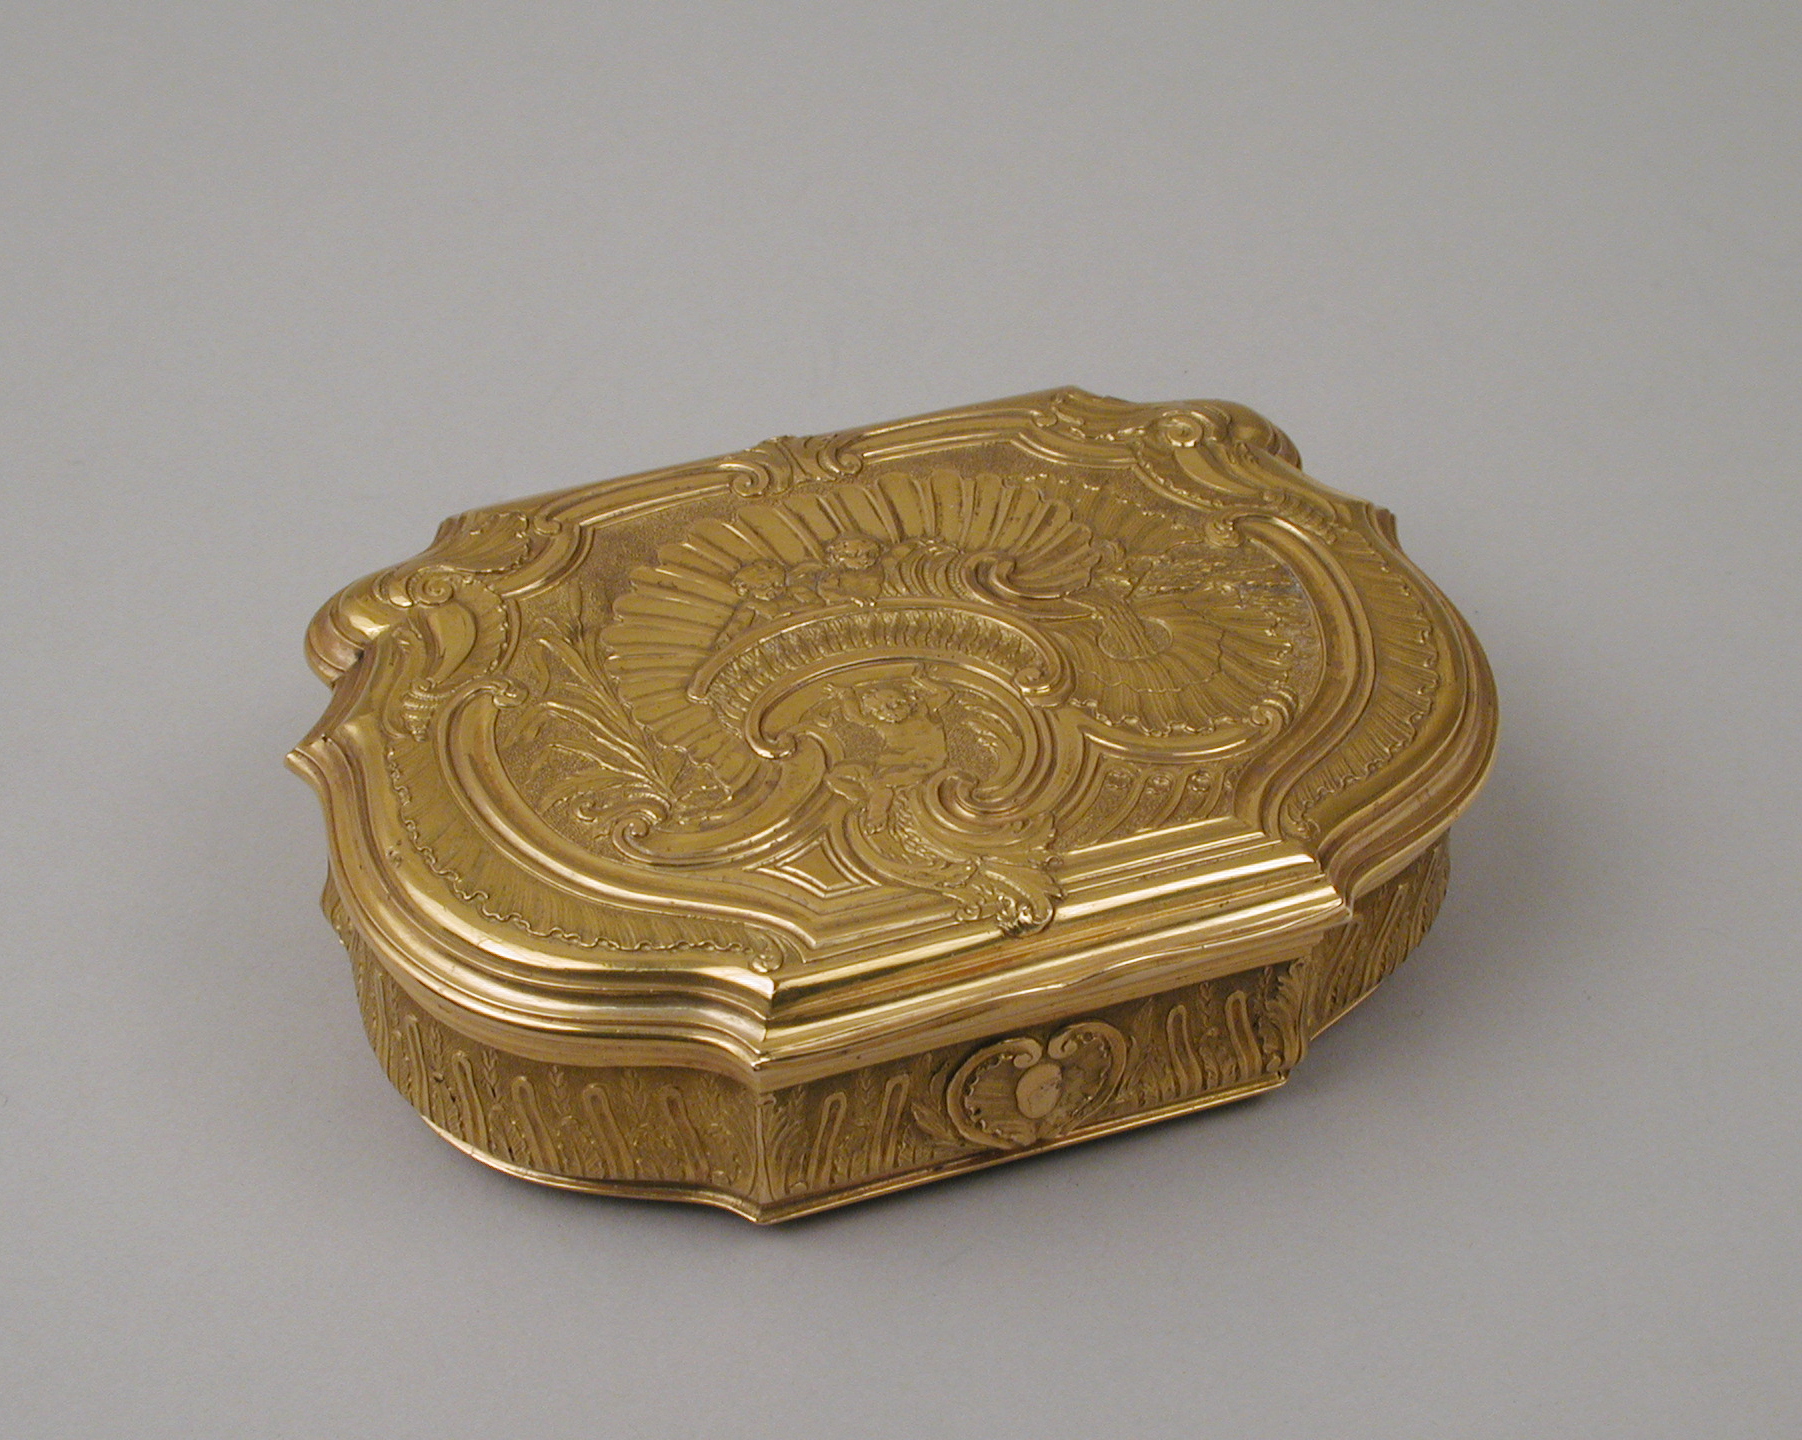 The Spectacular Snuffboxes of The Met